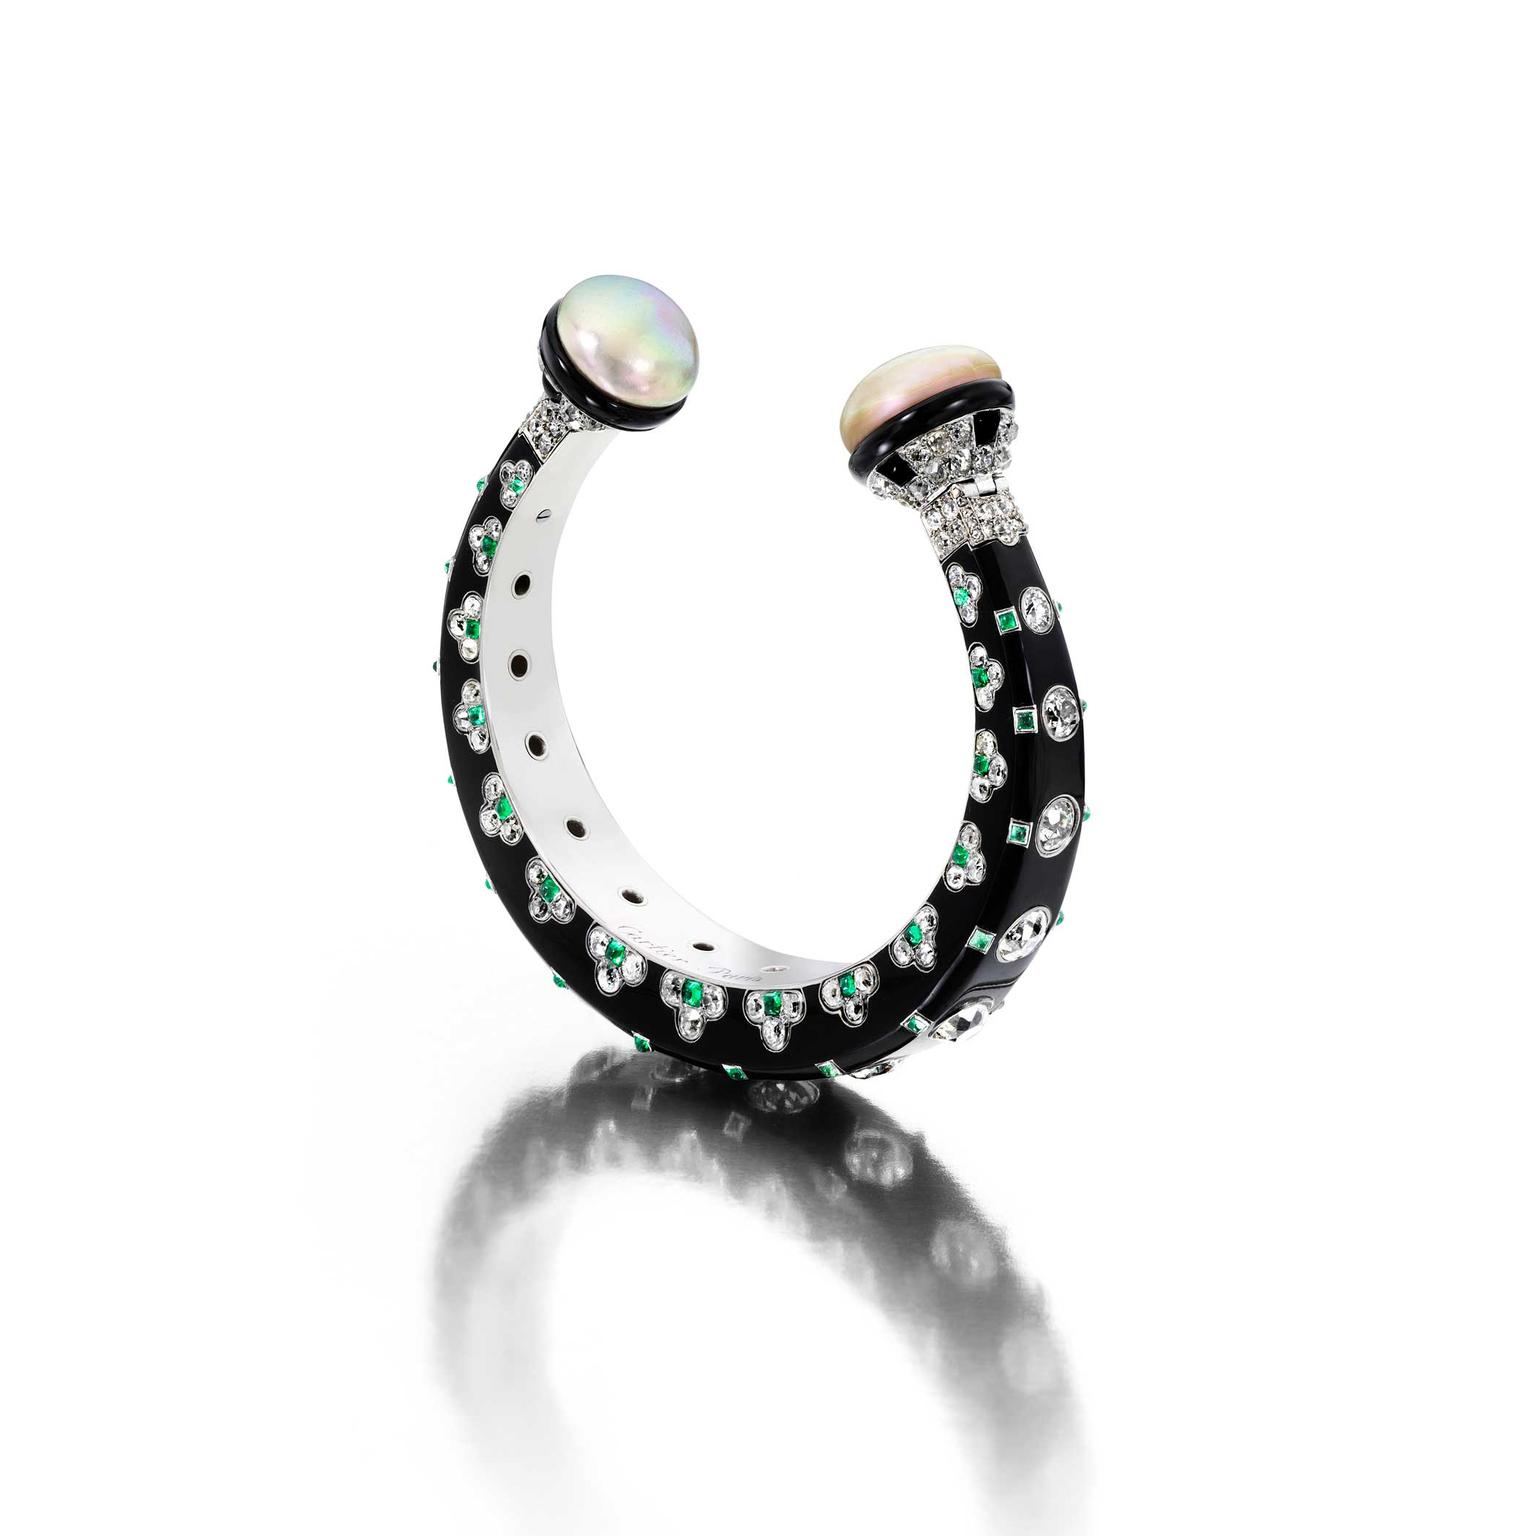 Siegelson Art Deco diamond, natural pearl, emerald and onyx bangle by Cartier